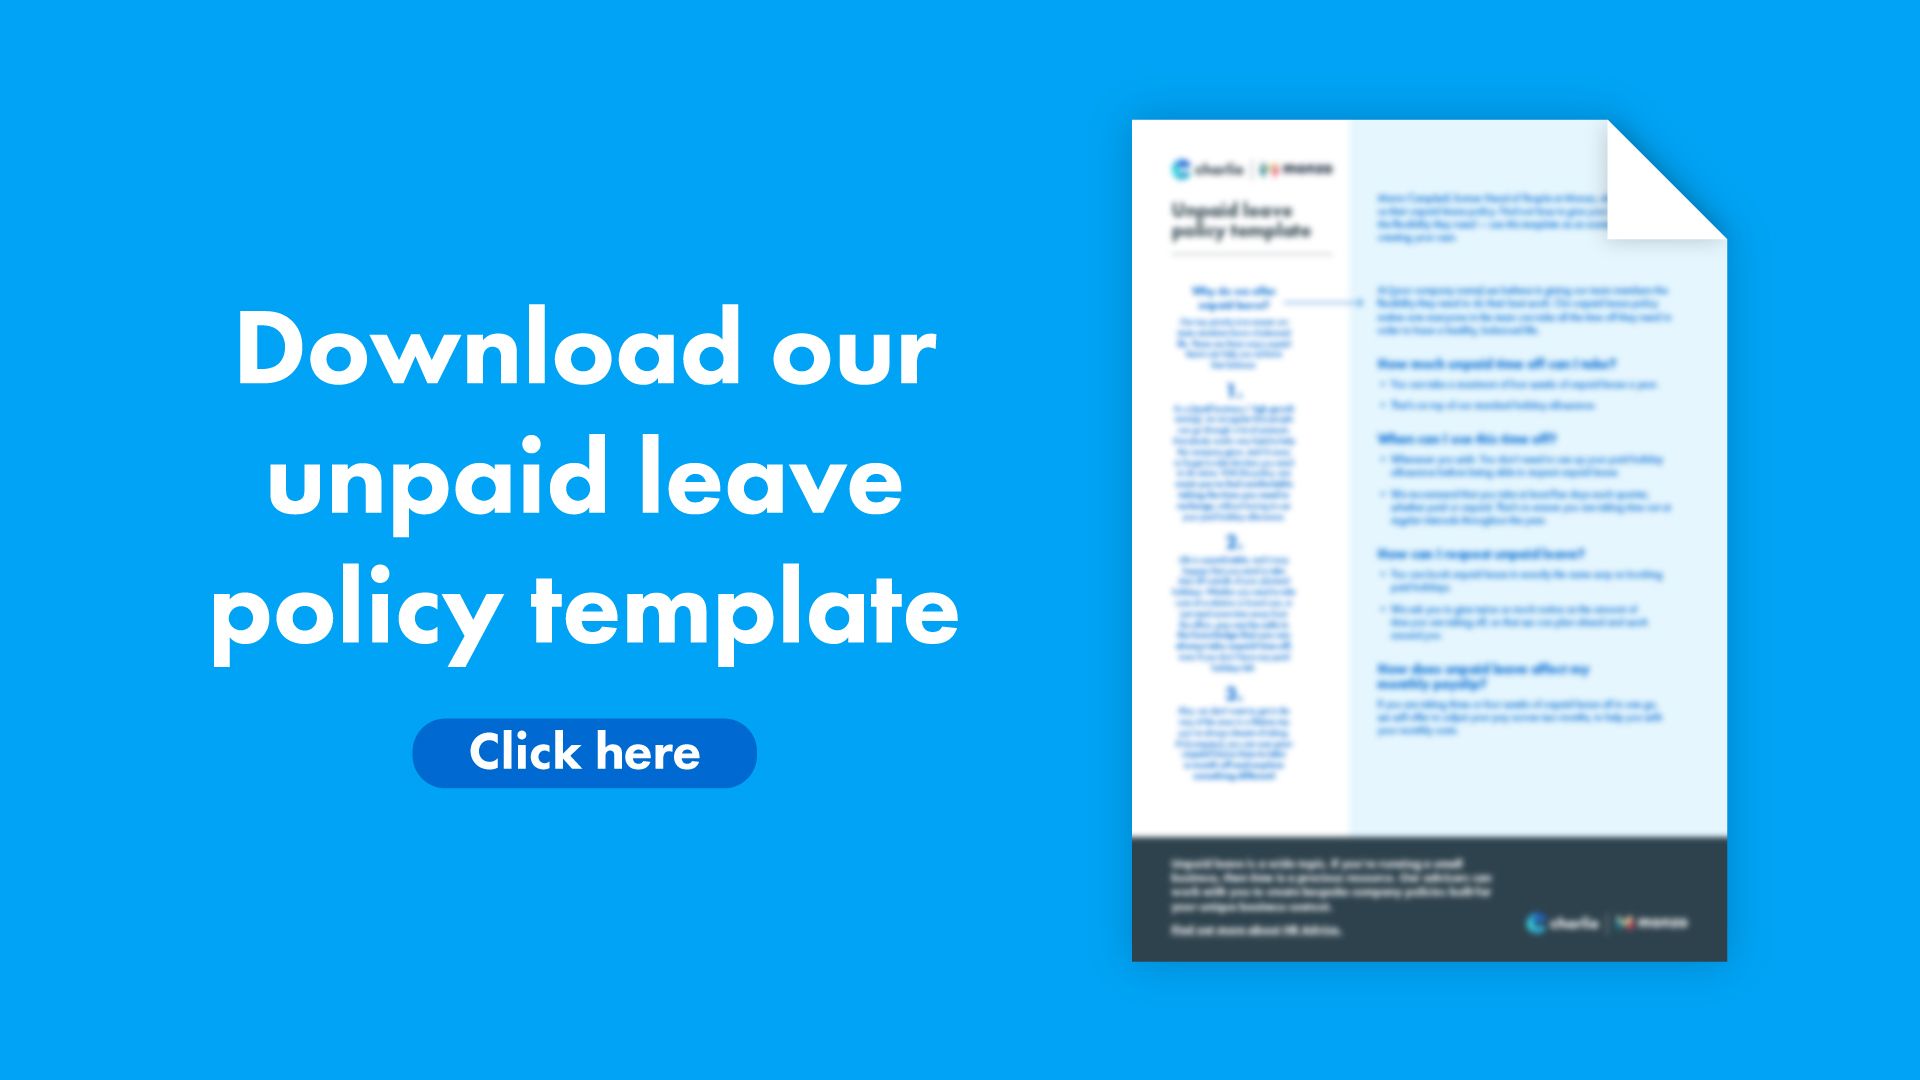 Click here to download our onboarding checklist